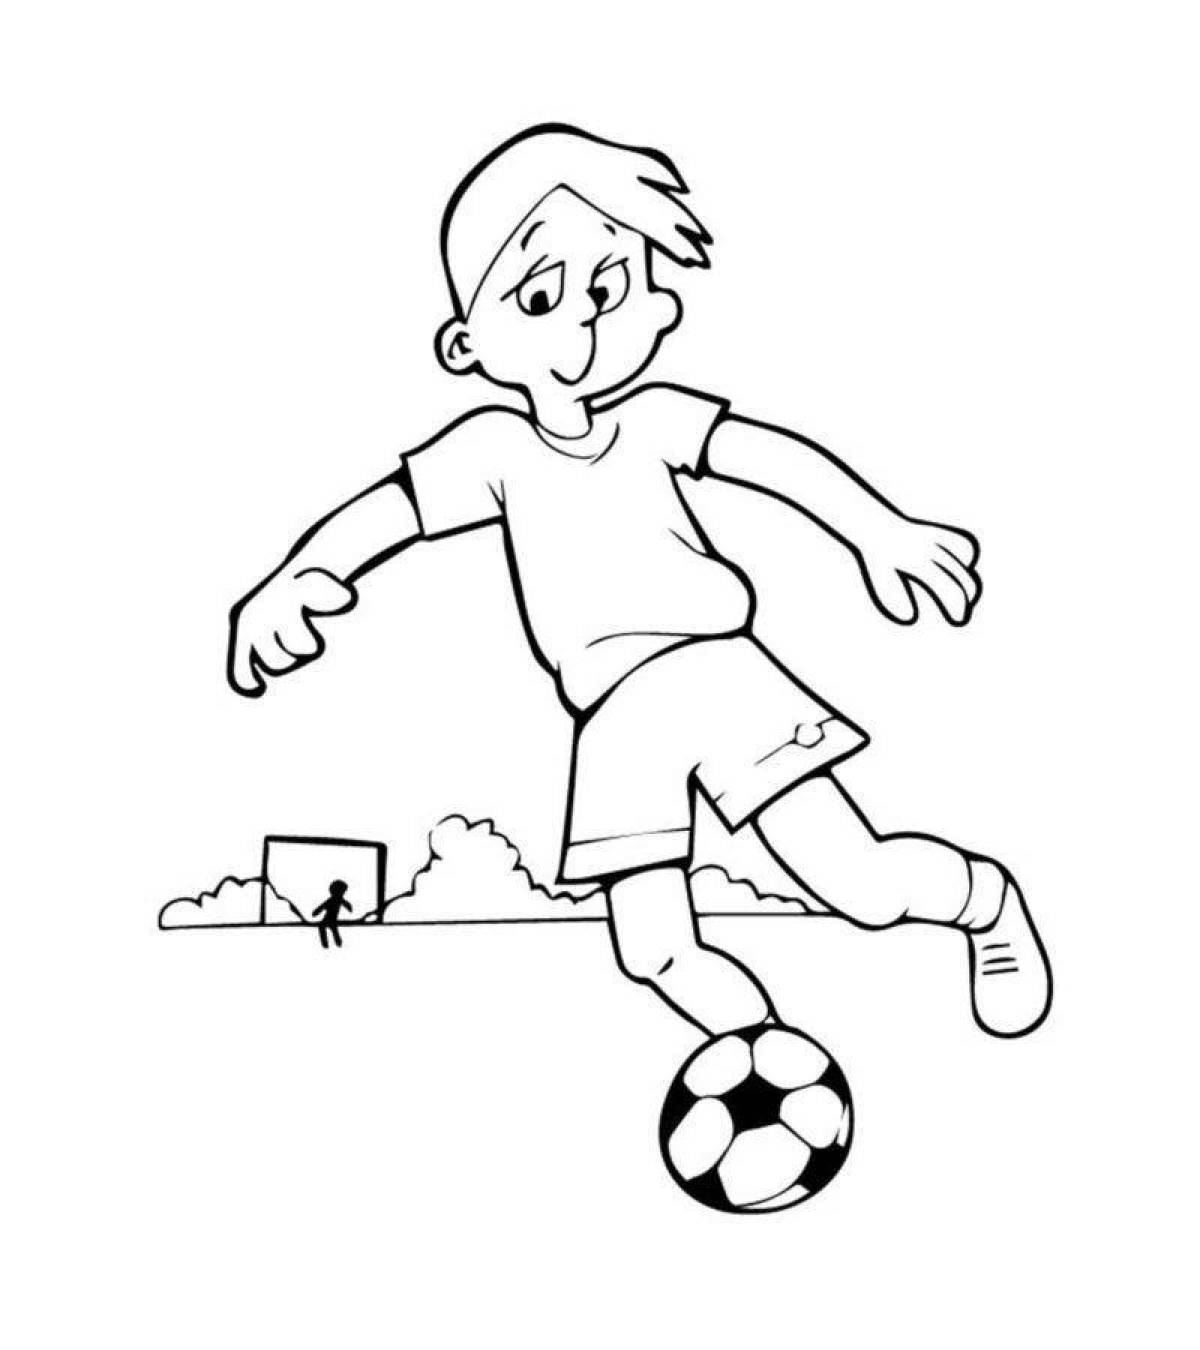 Outstanding football coloring book for kids